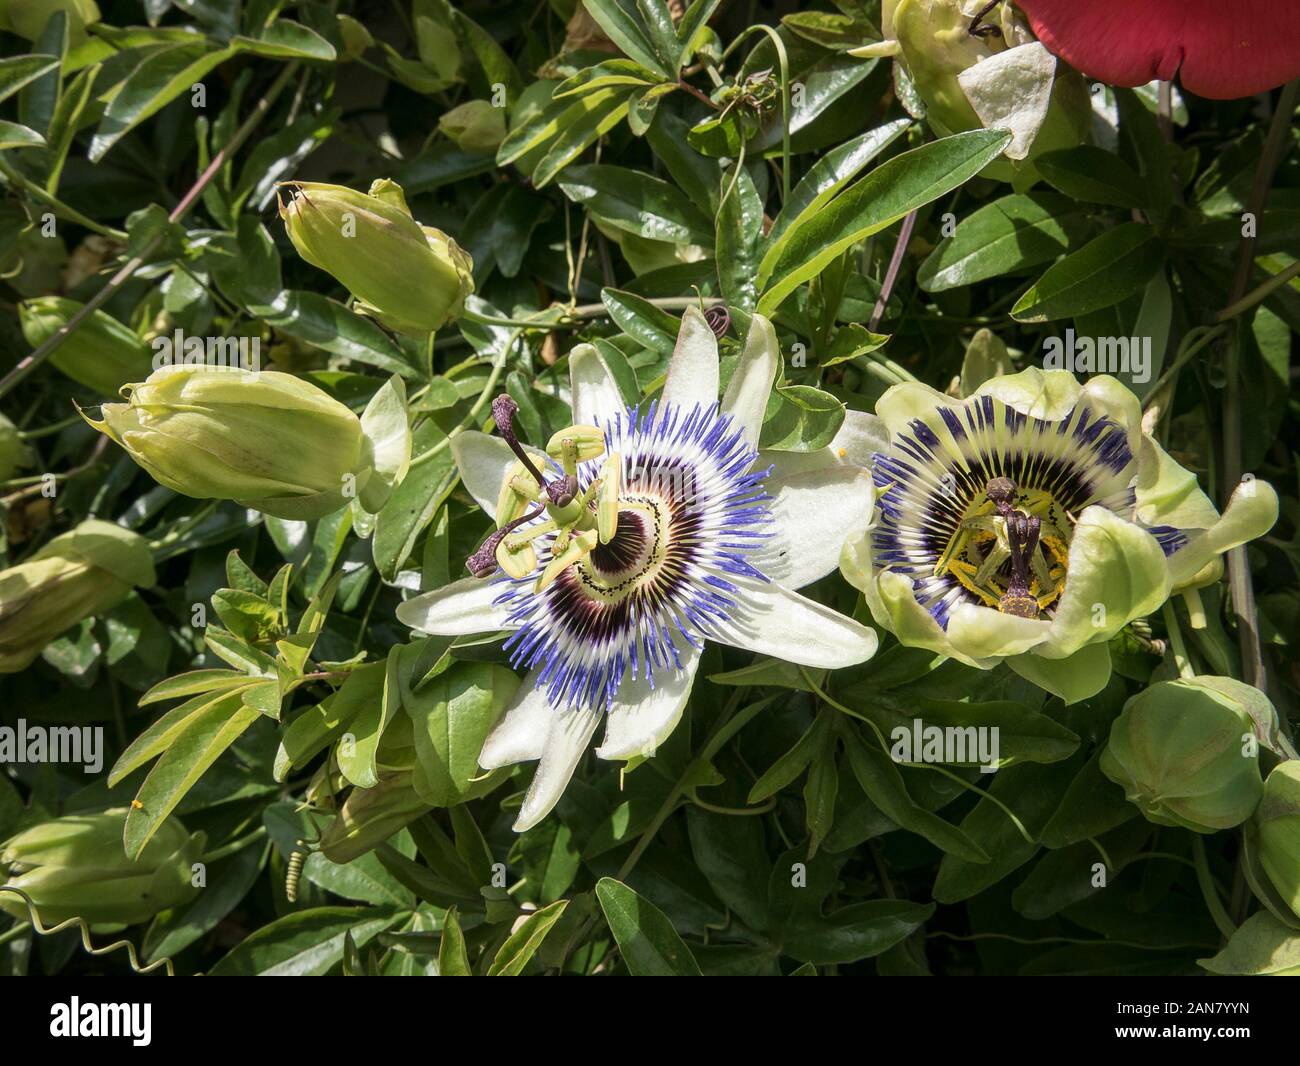 Passion flower flowering showing intricate details of its flower head Stock Photo